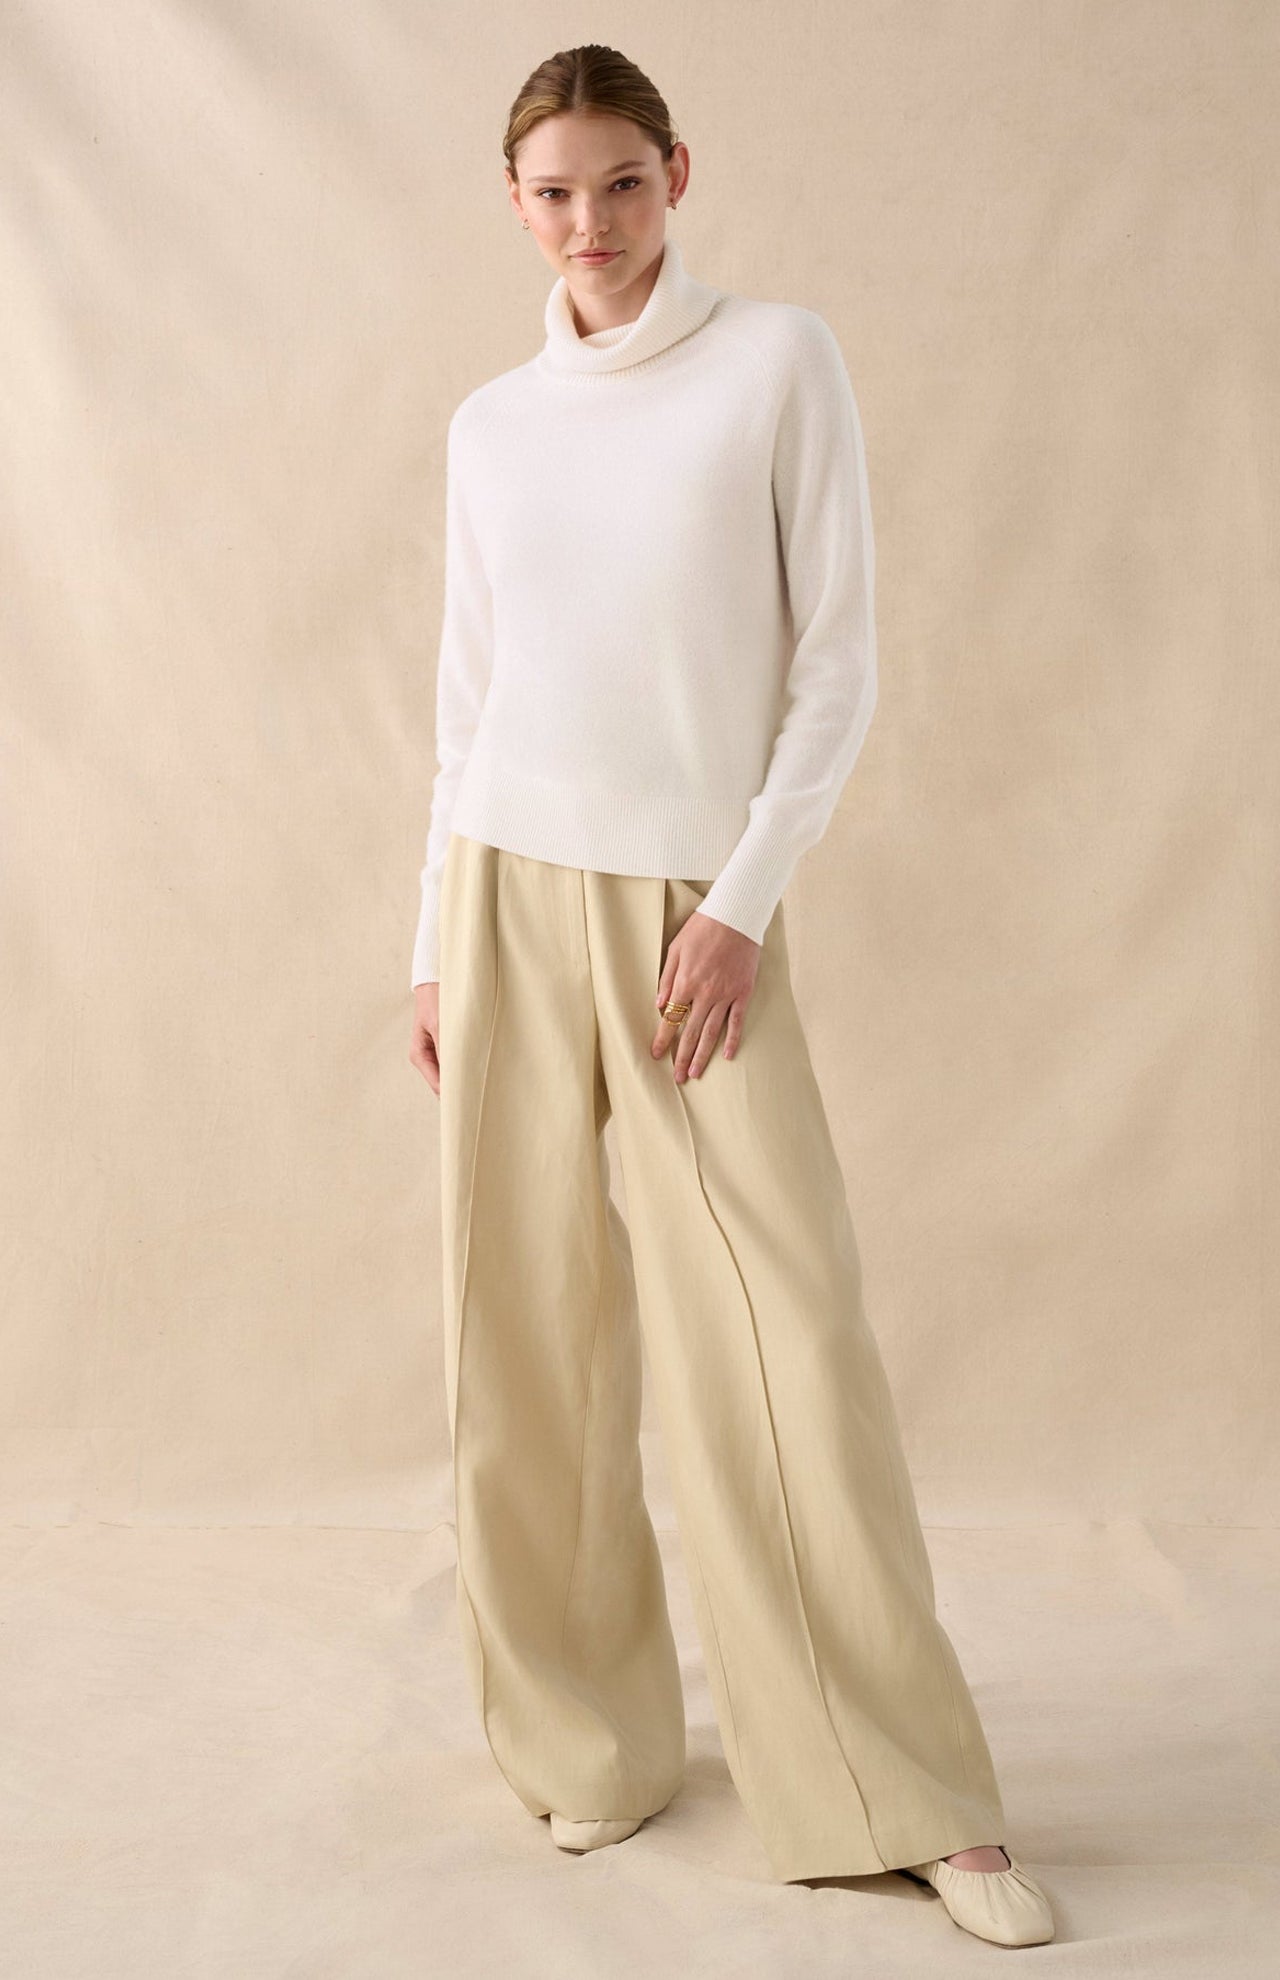 White And Warren Cashmere Essential Turtleneck Sweater Soft White Front Full Body Model Image (6977567096947)